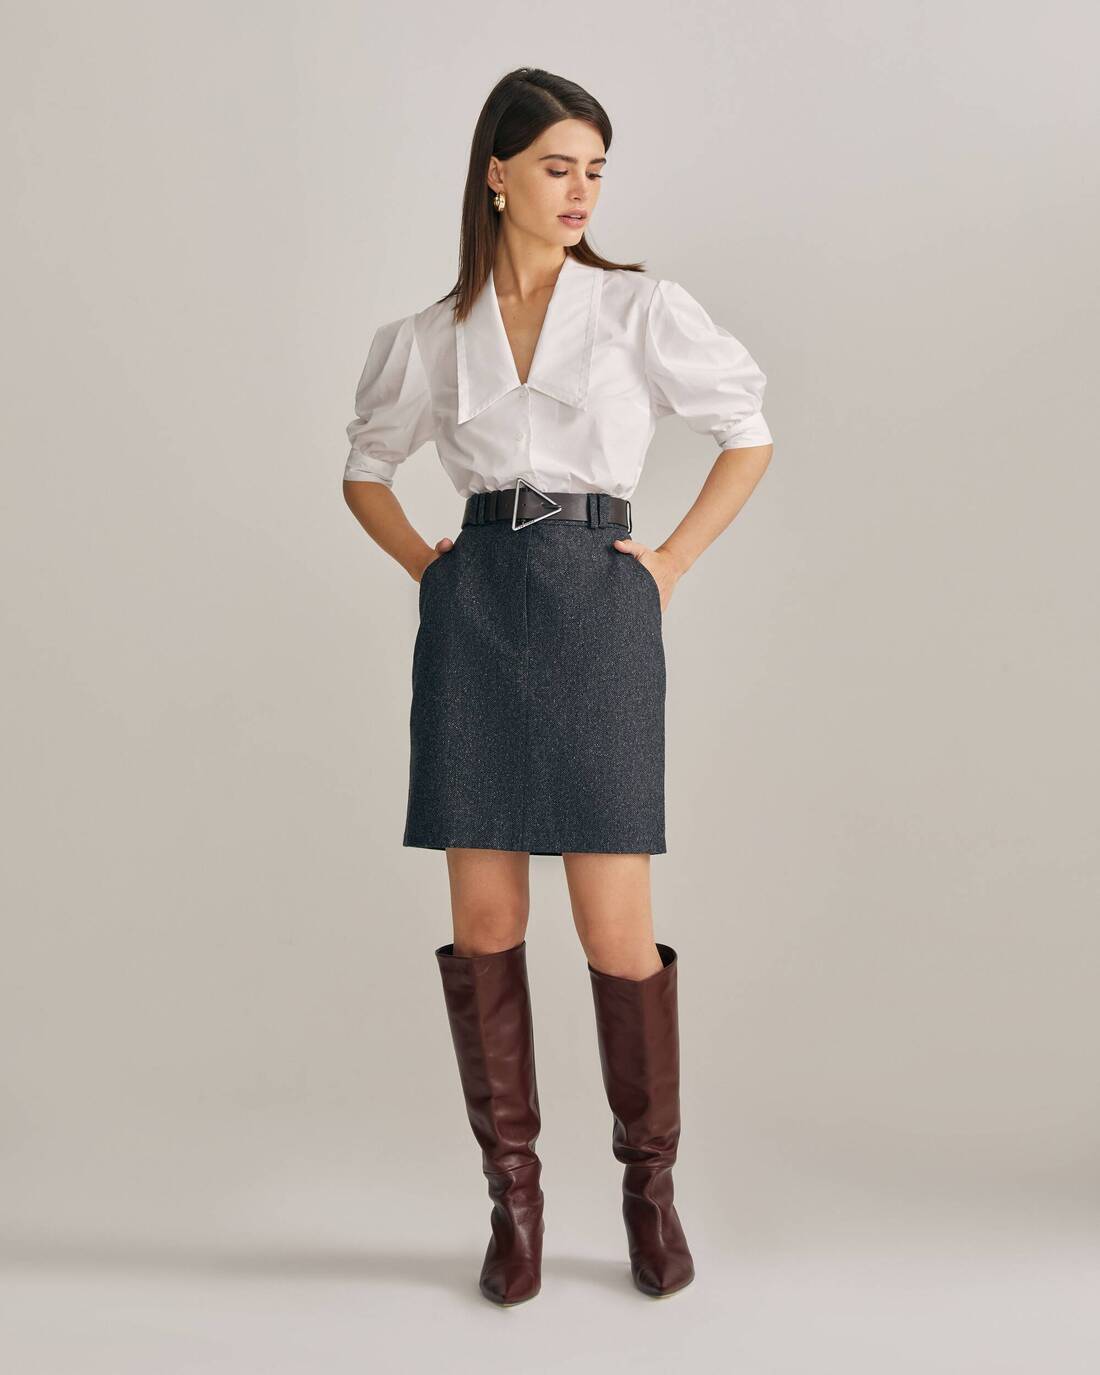 Tweed mini skirt with contrasting stitching